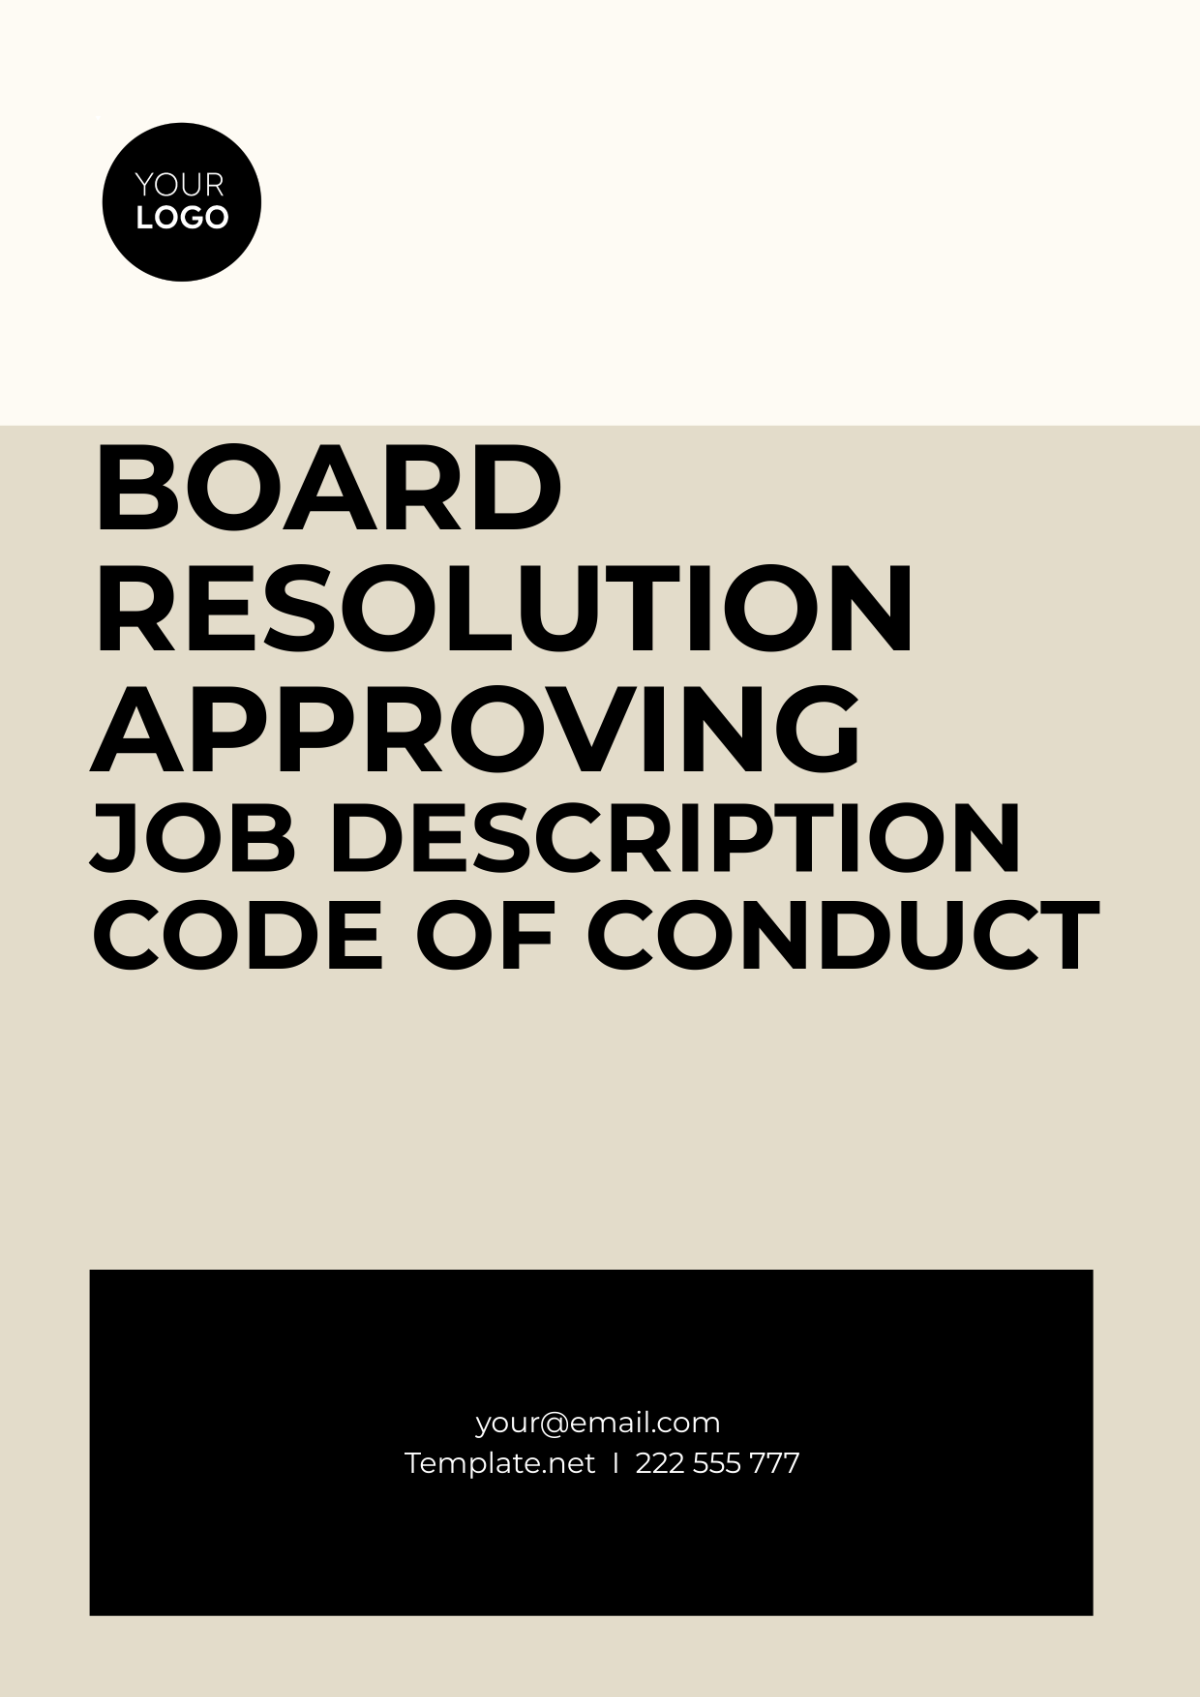 Free Board Resolution Approving Job Description Code Of Conduct Template